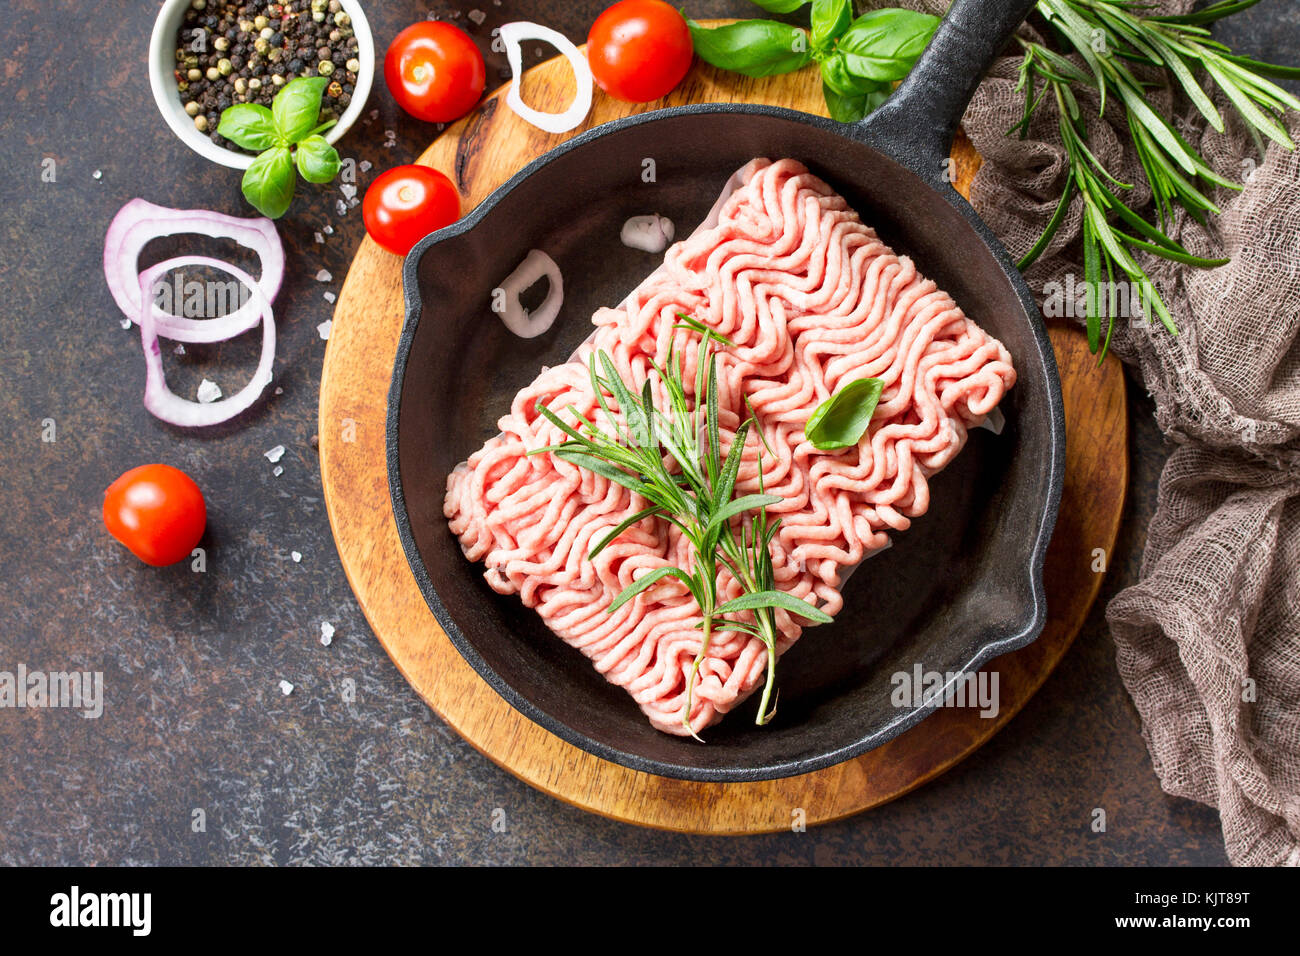 Raw minced beef on a cast iron frying pan, and a variety of spices, vegetables and herbs. Stock Photo